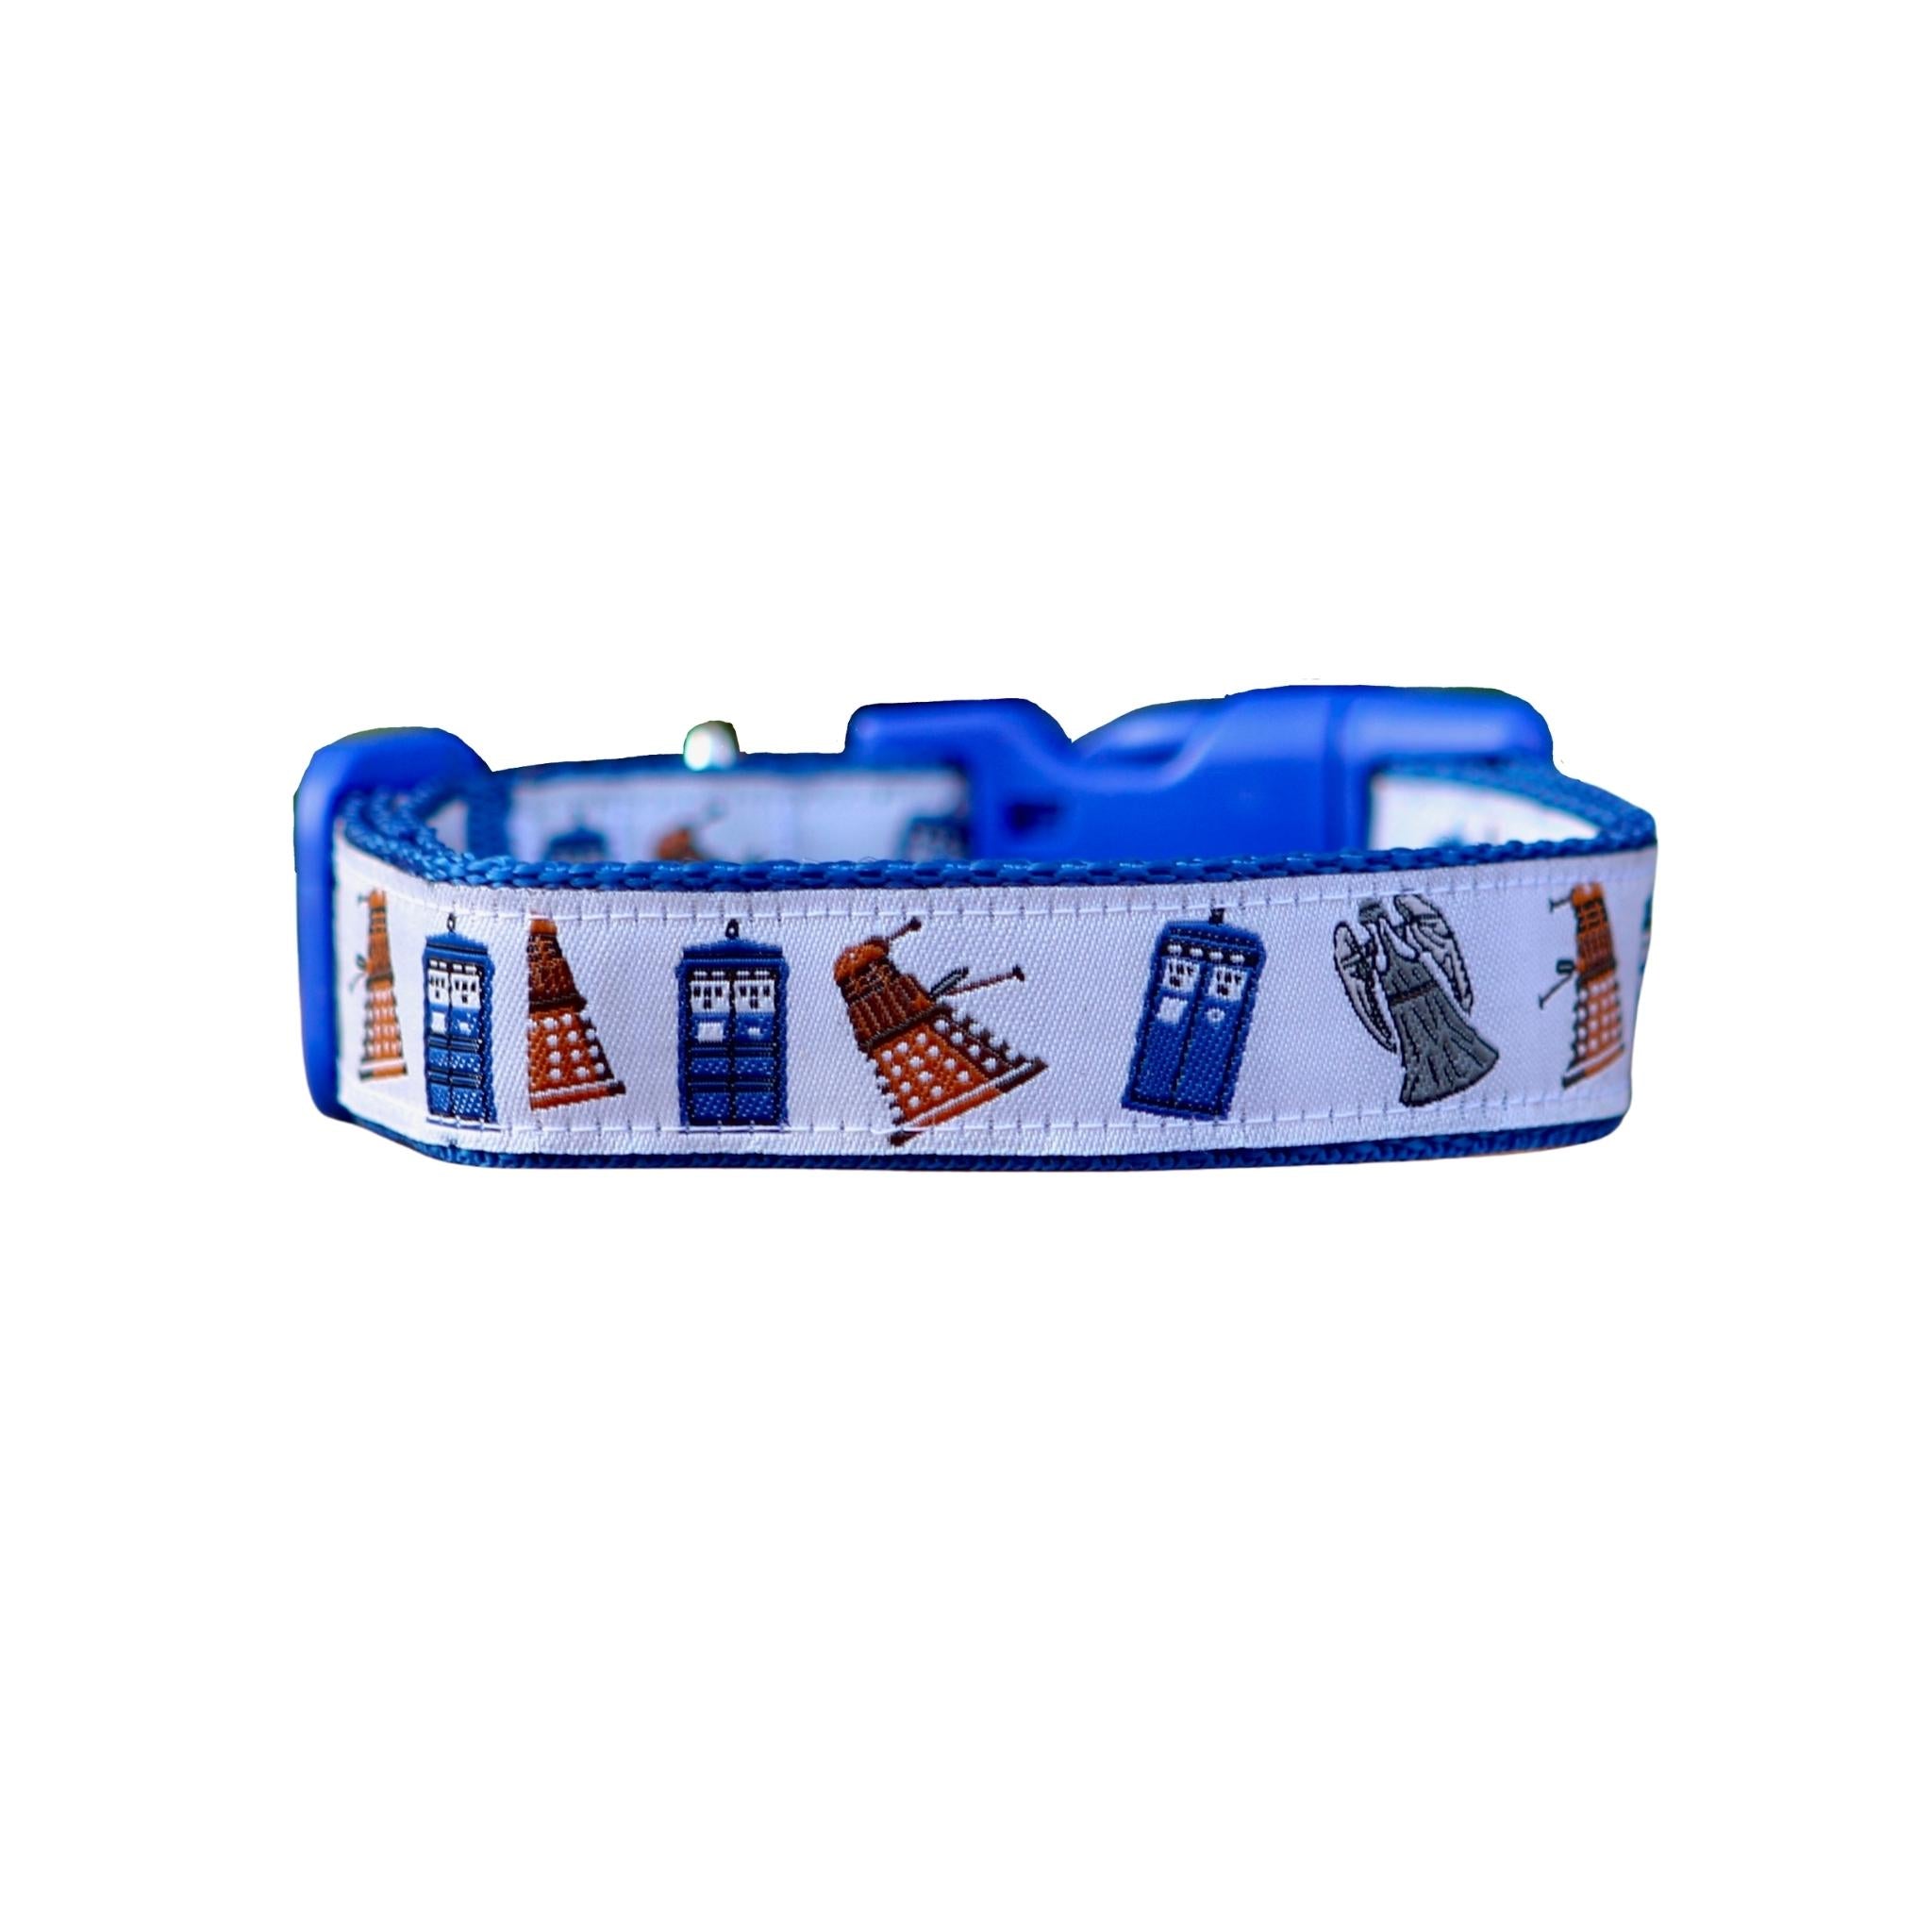 Dr Who Dog Collar / XS - L